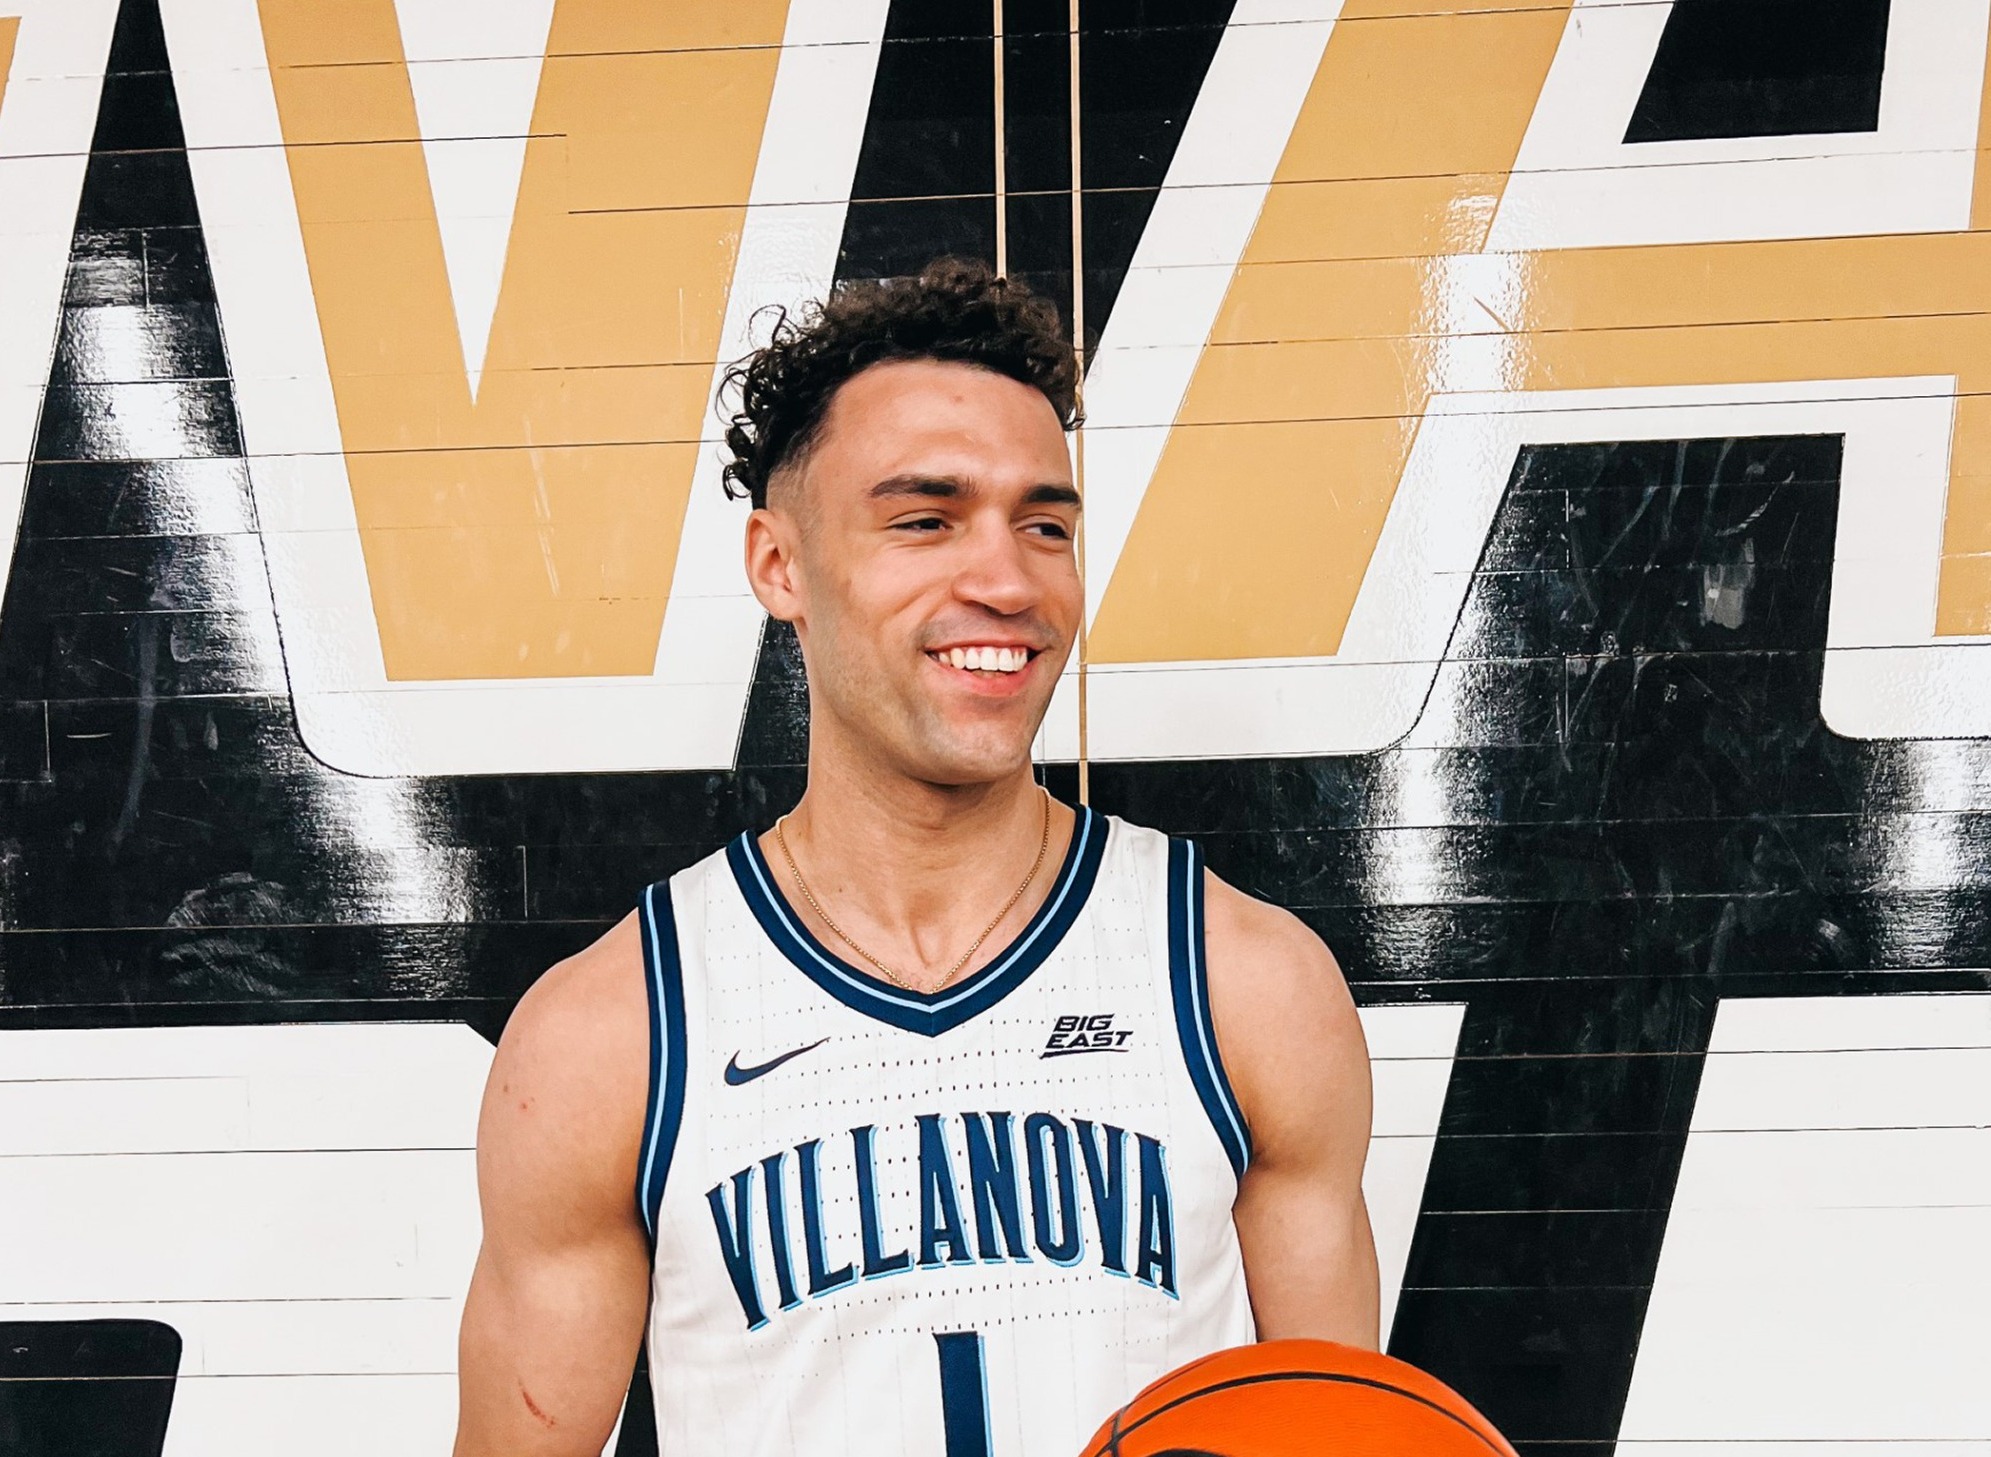 Tyler Burton and the Villanova Wildcats are looking to bounce back after a 17-17 year.